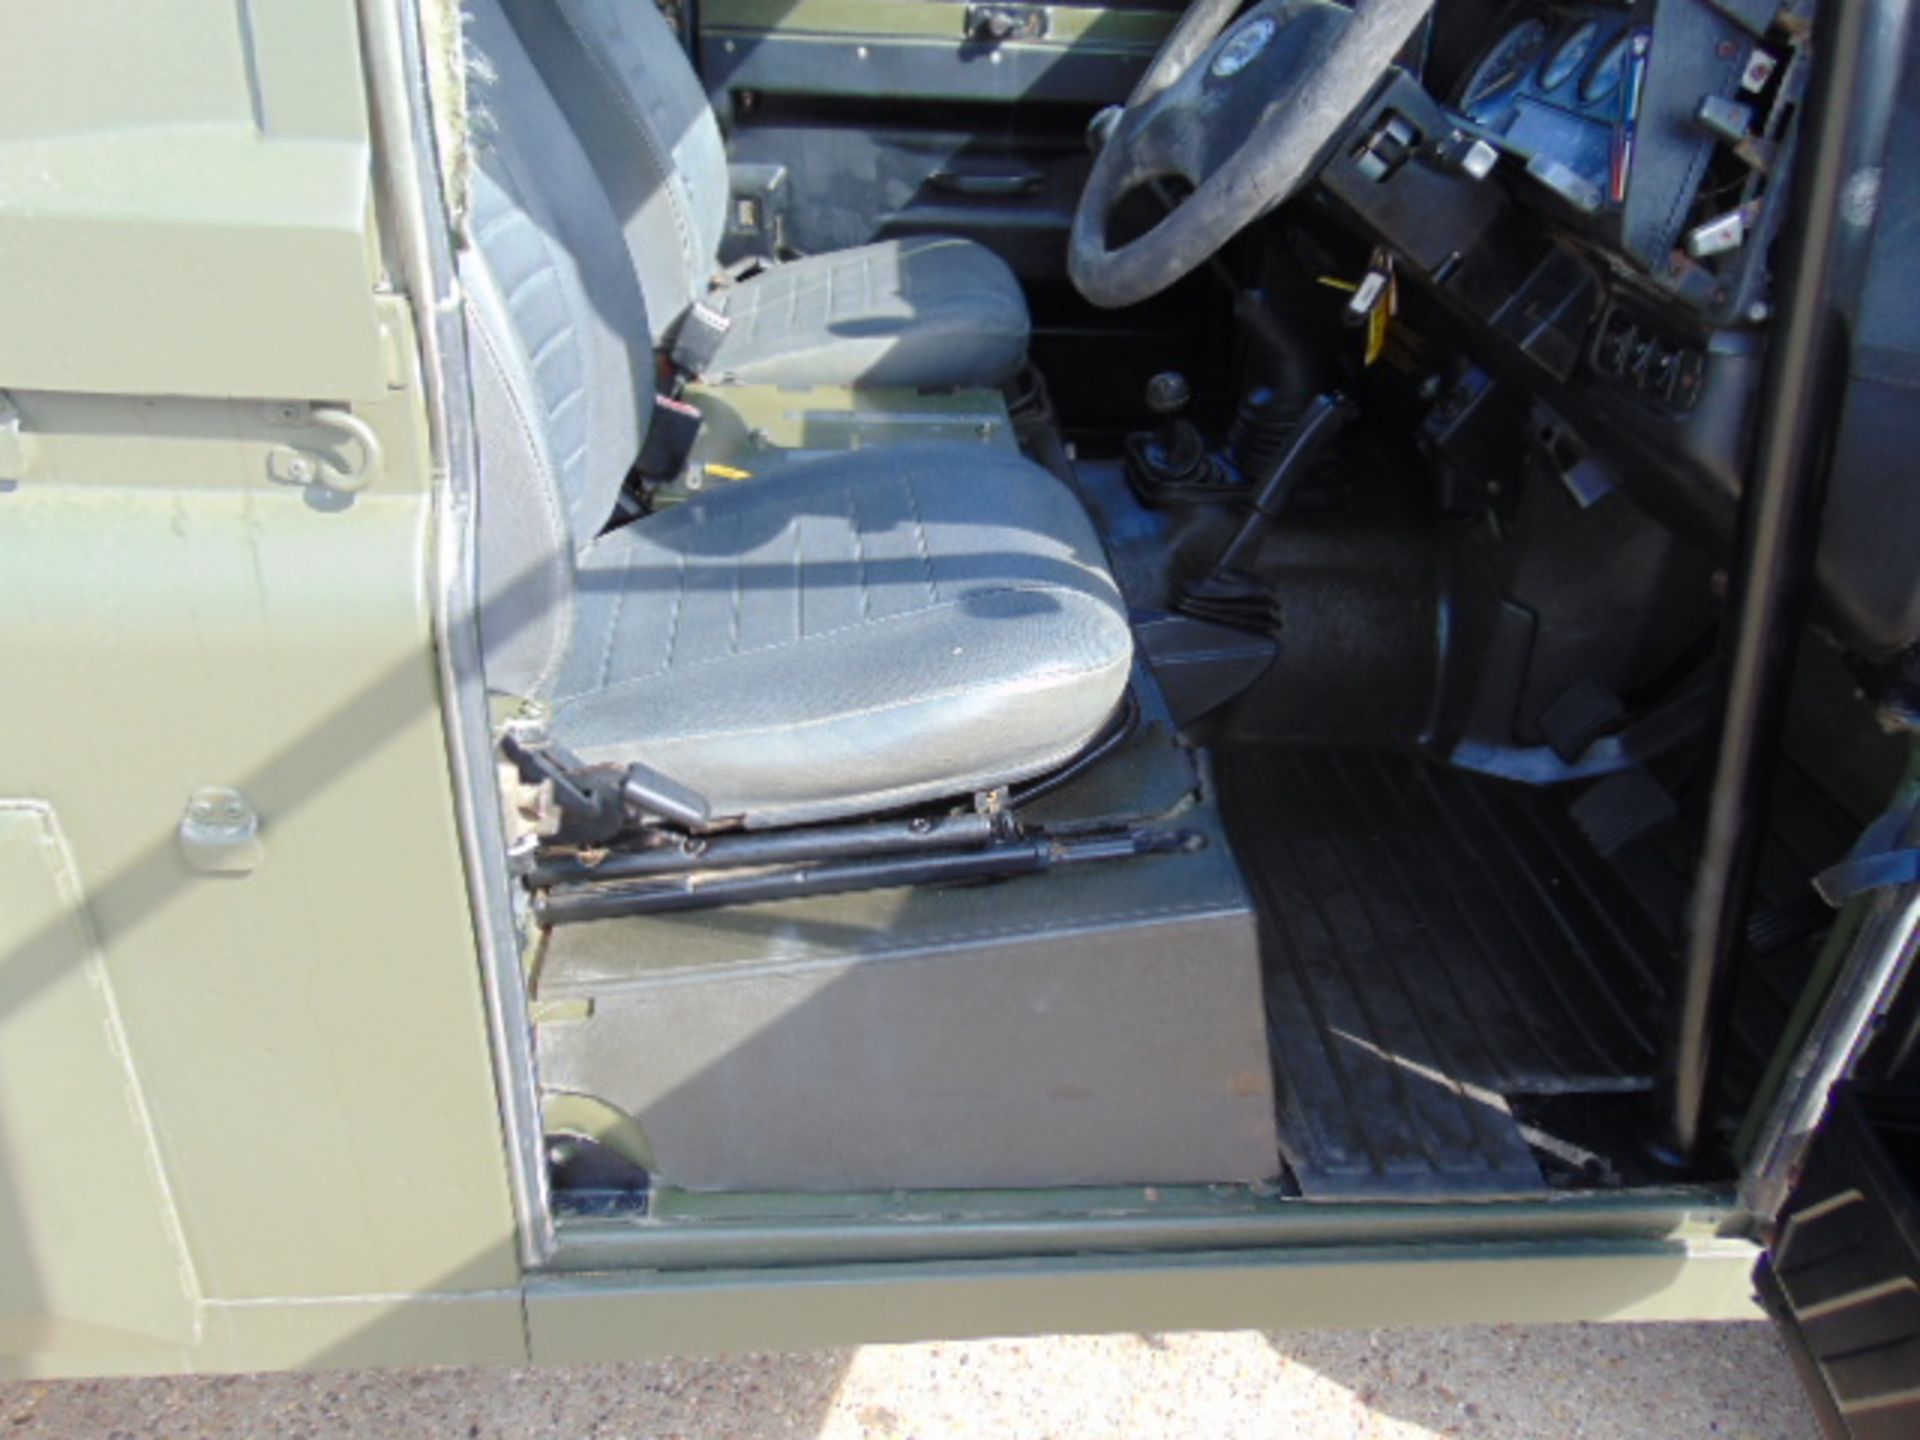 Military Specification Land Rover Wolf 110 Hard Top - Image 20 of 28